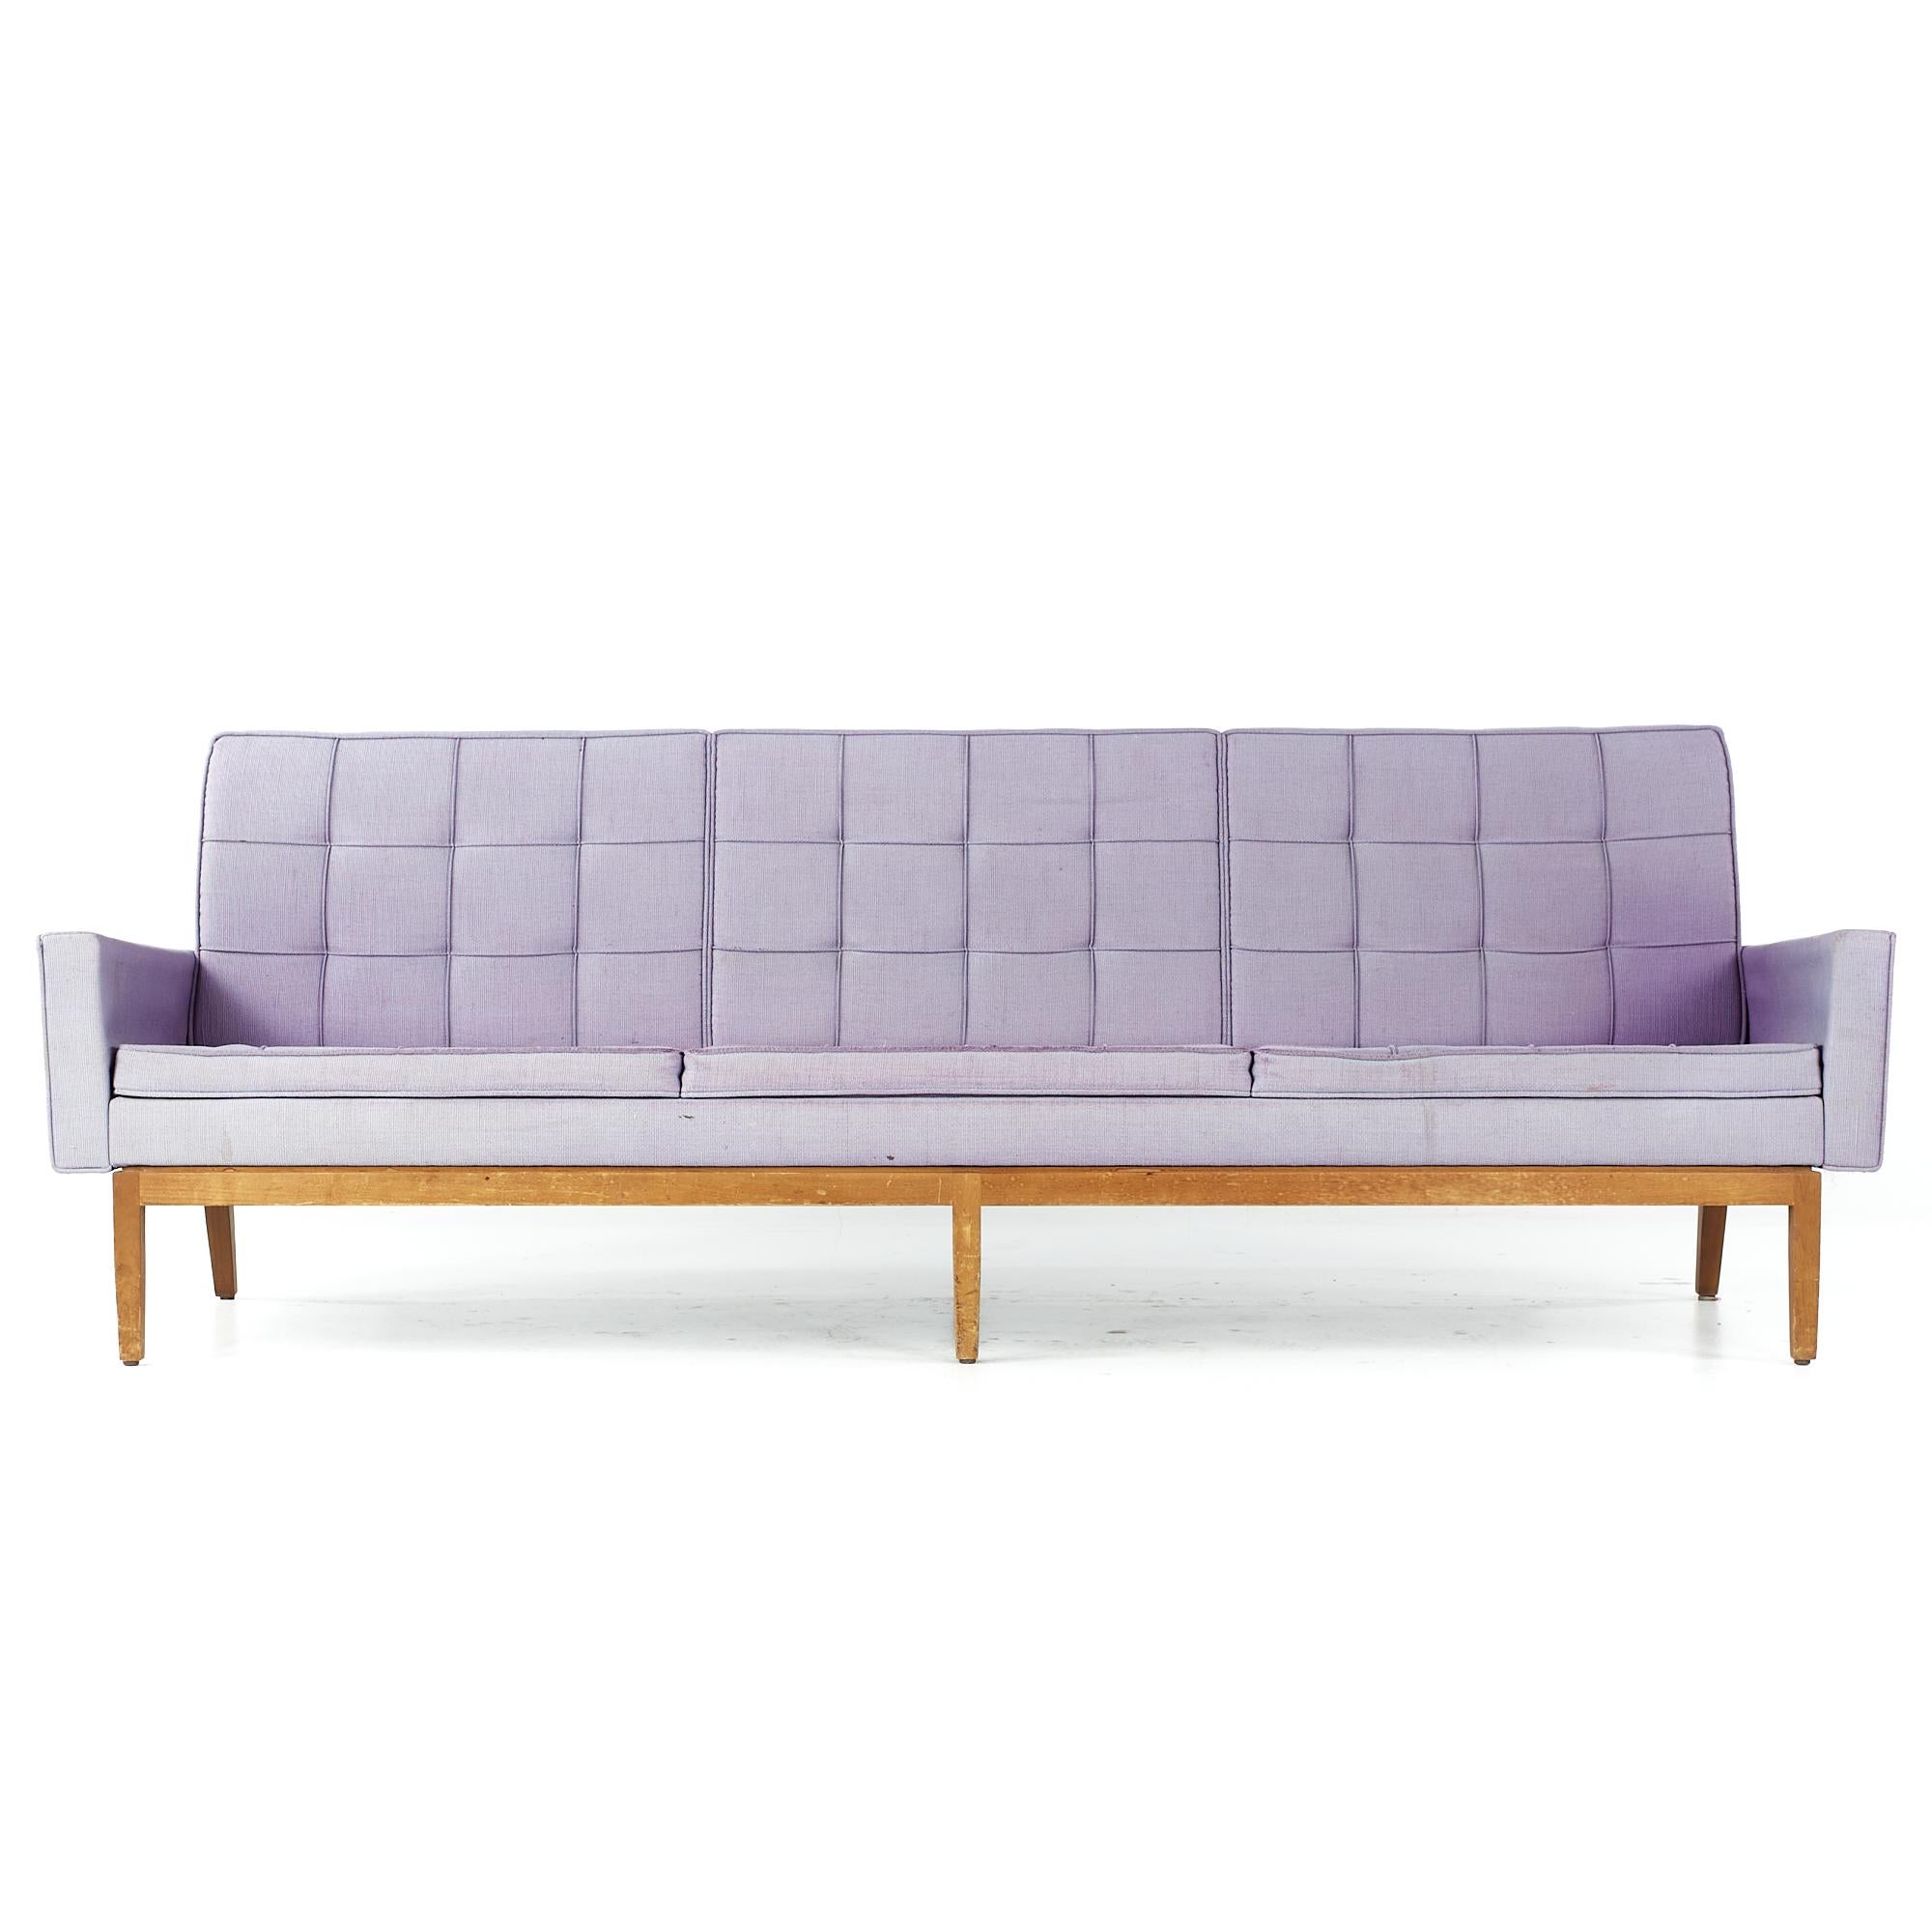 Florence Knoll midcentury walnut sofa.

This sofa measures: 90.75 wide x 28.5 deep x 31.5 inches high, with a seat height of 15.5 and arm height of 21.5 inches.

All pieces of furniture can be had in what we call restored vintage condition. That